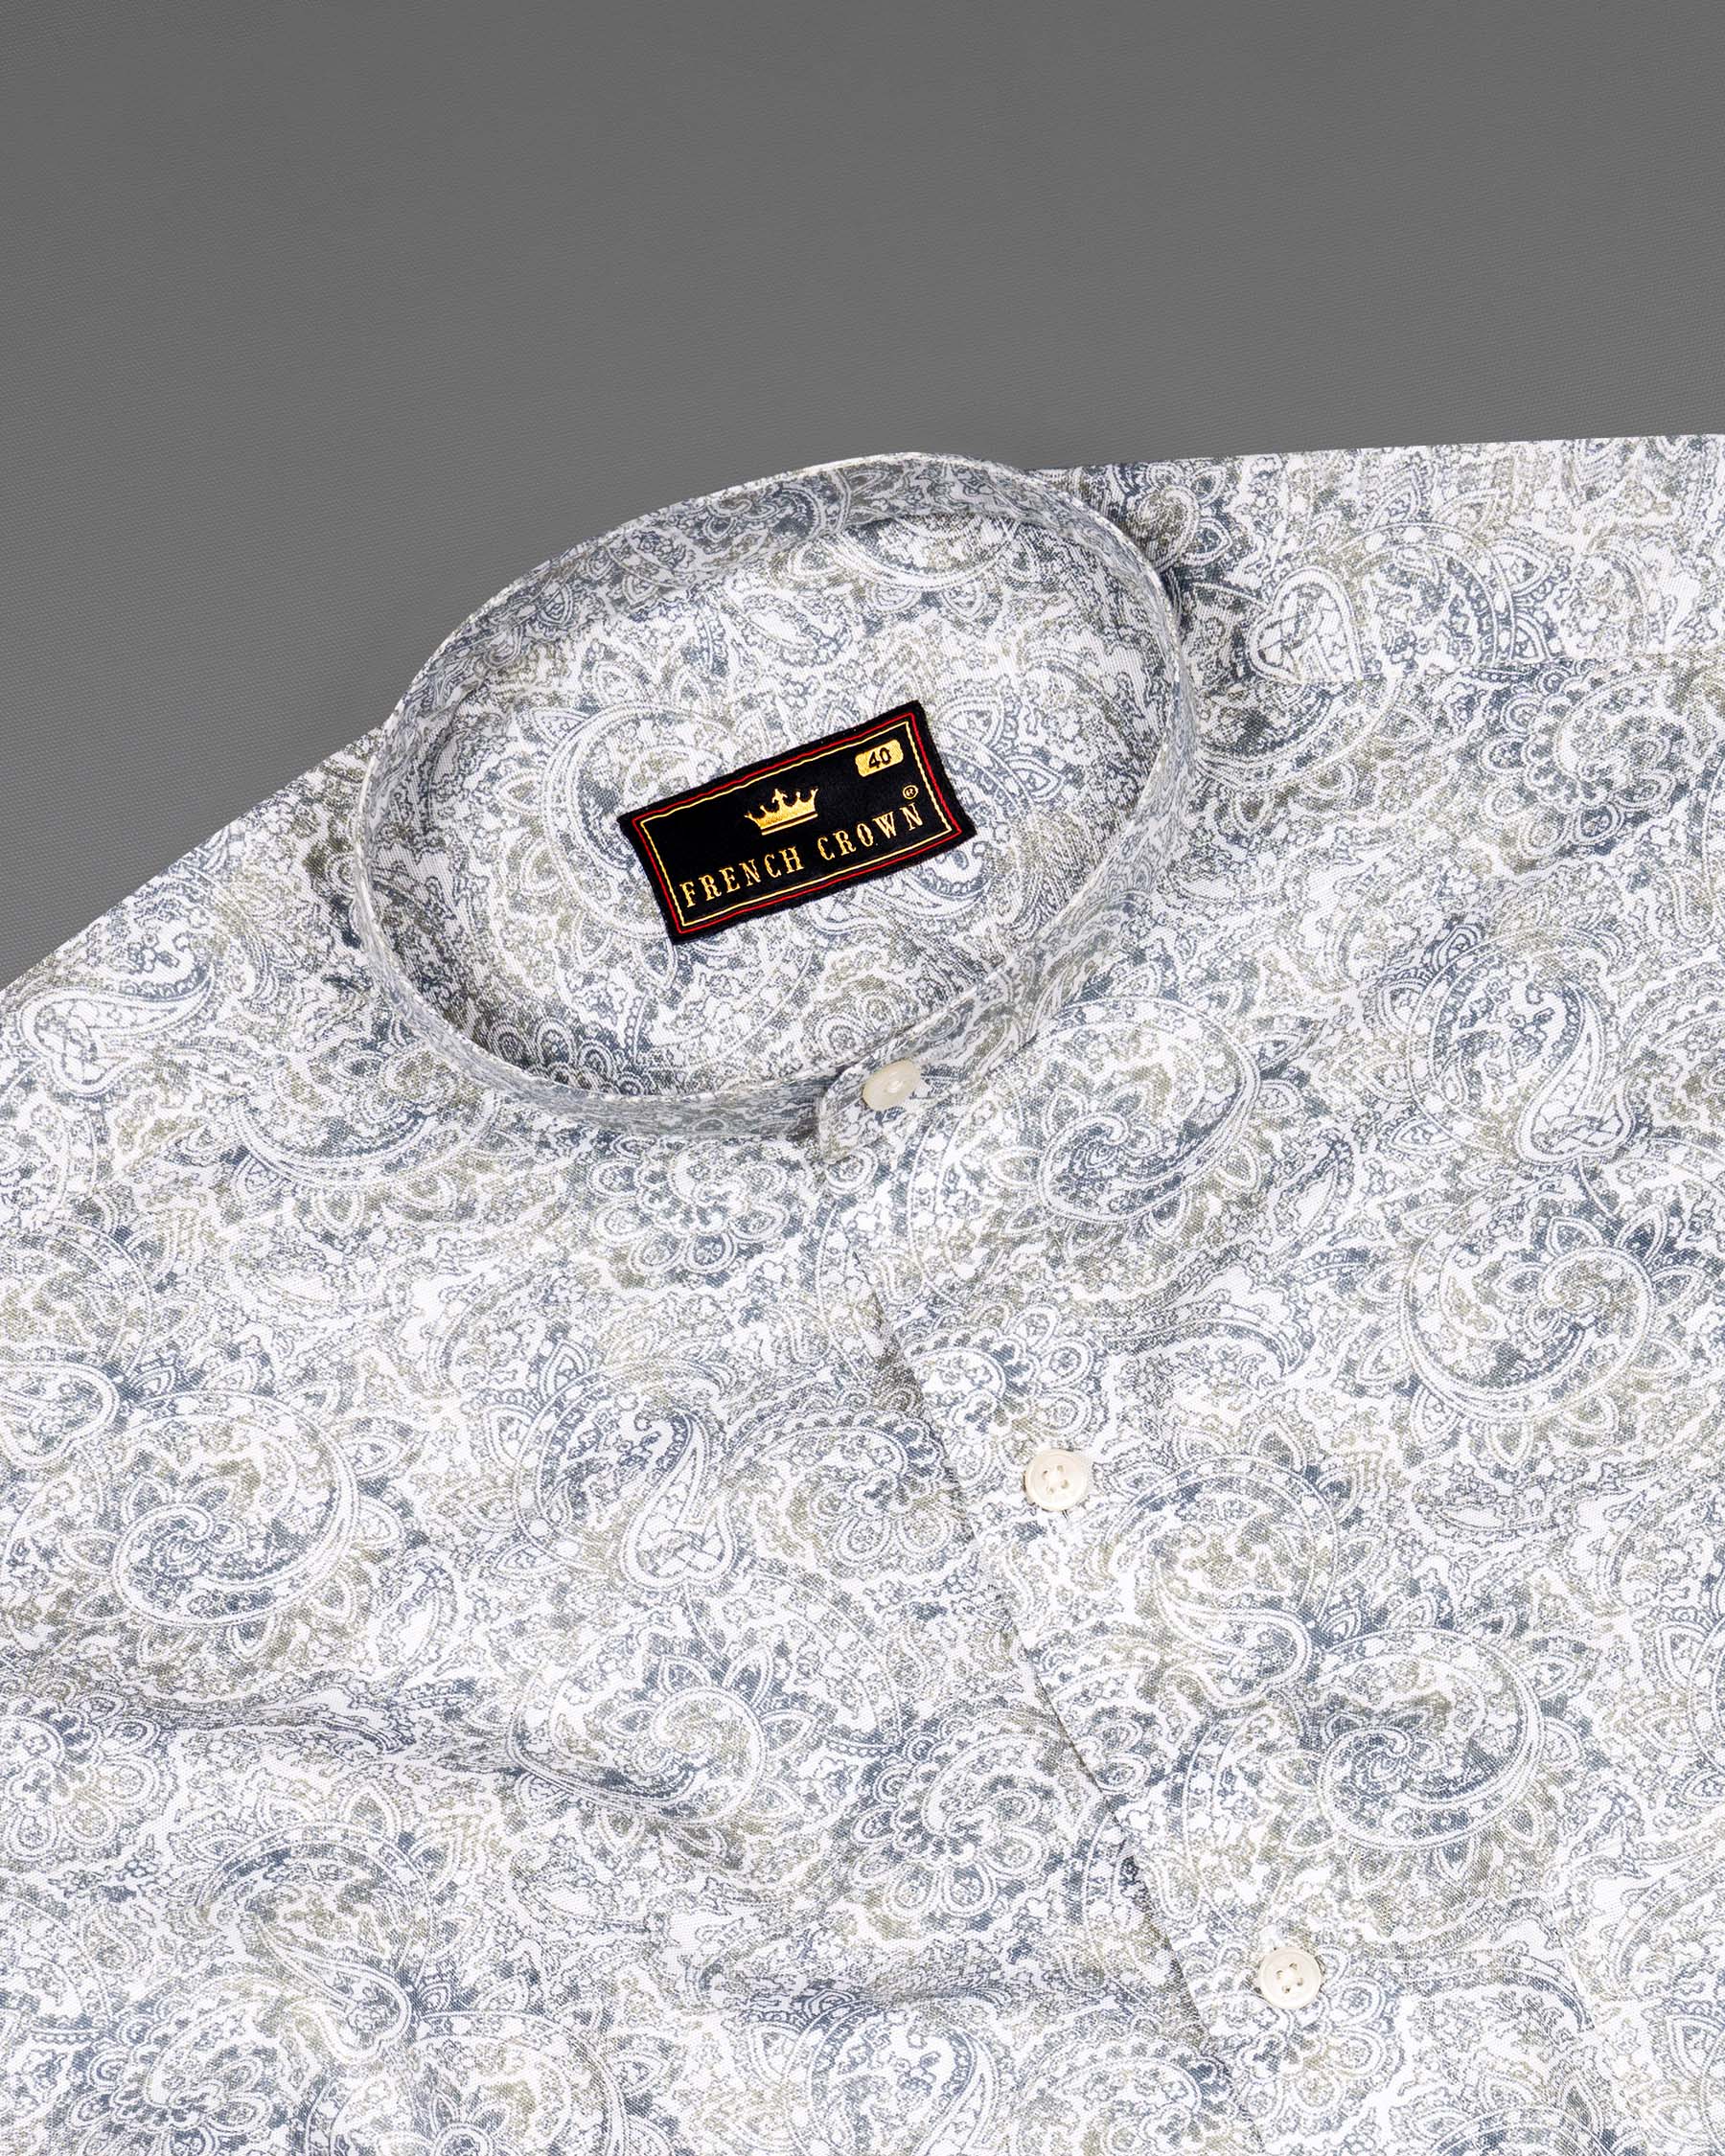 Bright White with Raven and Pumice Gray Paisley Printed Luxurious Linen Shirt 6634-M-38,6634-M-H-38,6634-M-39,6634-M-H-39,6634-M-40,6634-M-H-40,6634-M-42,6634-M-H-42,6634-M-44,6634-M-H-44,6634-M-46,6634-M-H-46,6634-M-48,6634-M-H-48,6634-M-50,6634-M-H-50,6634-M-52,6634-M-H-52